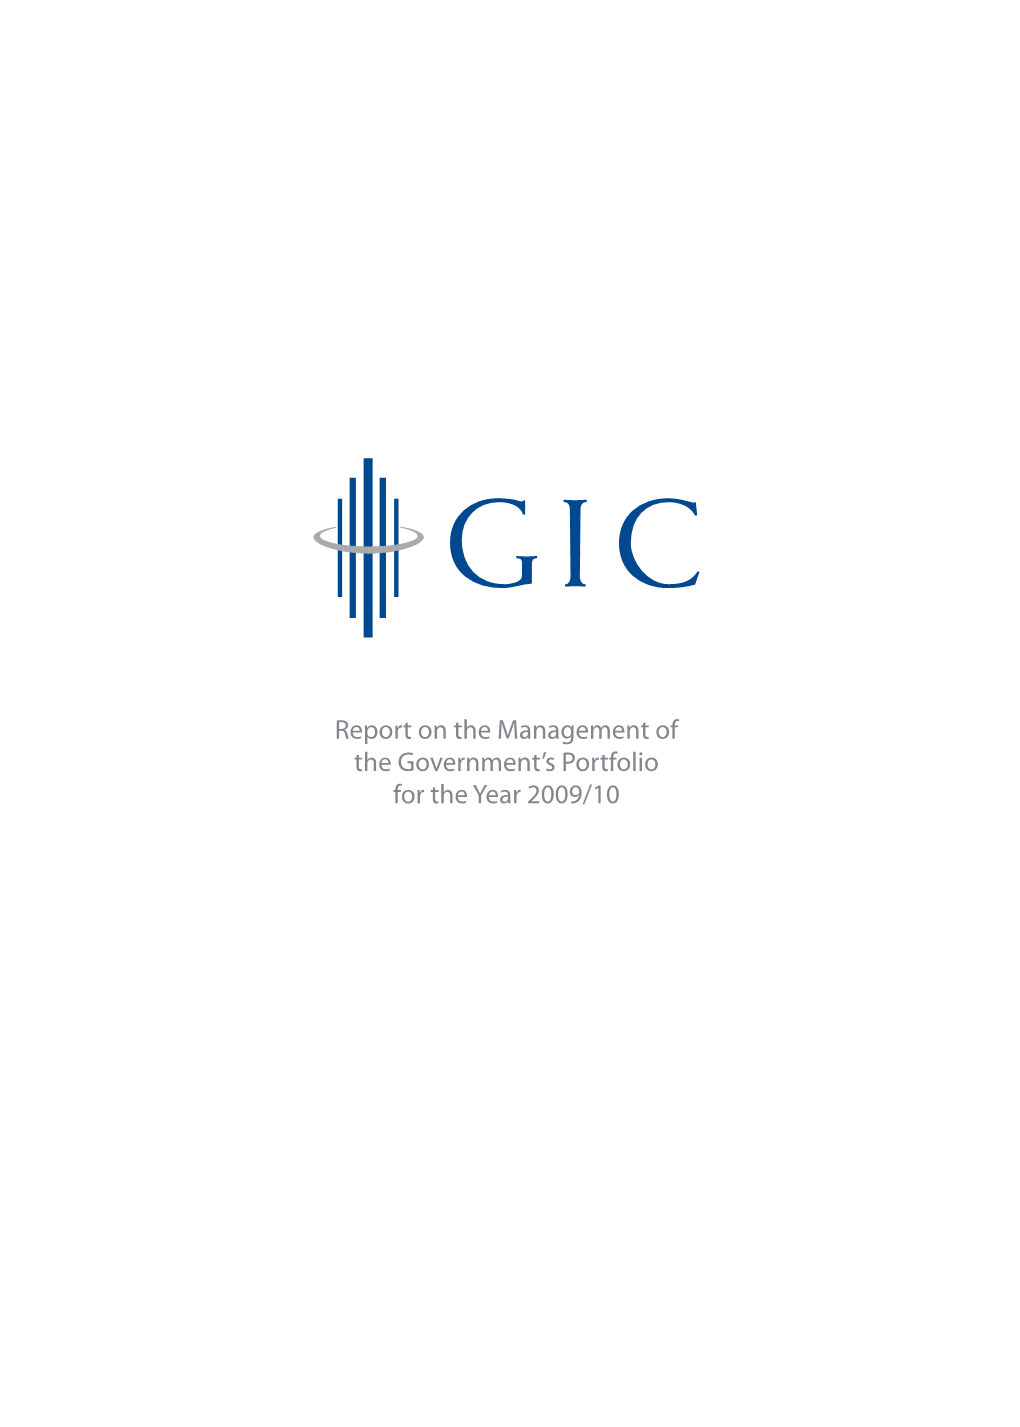 Report on the Management of the Government's Portfolio for the Year